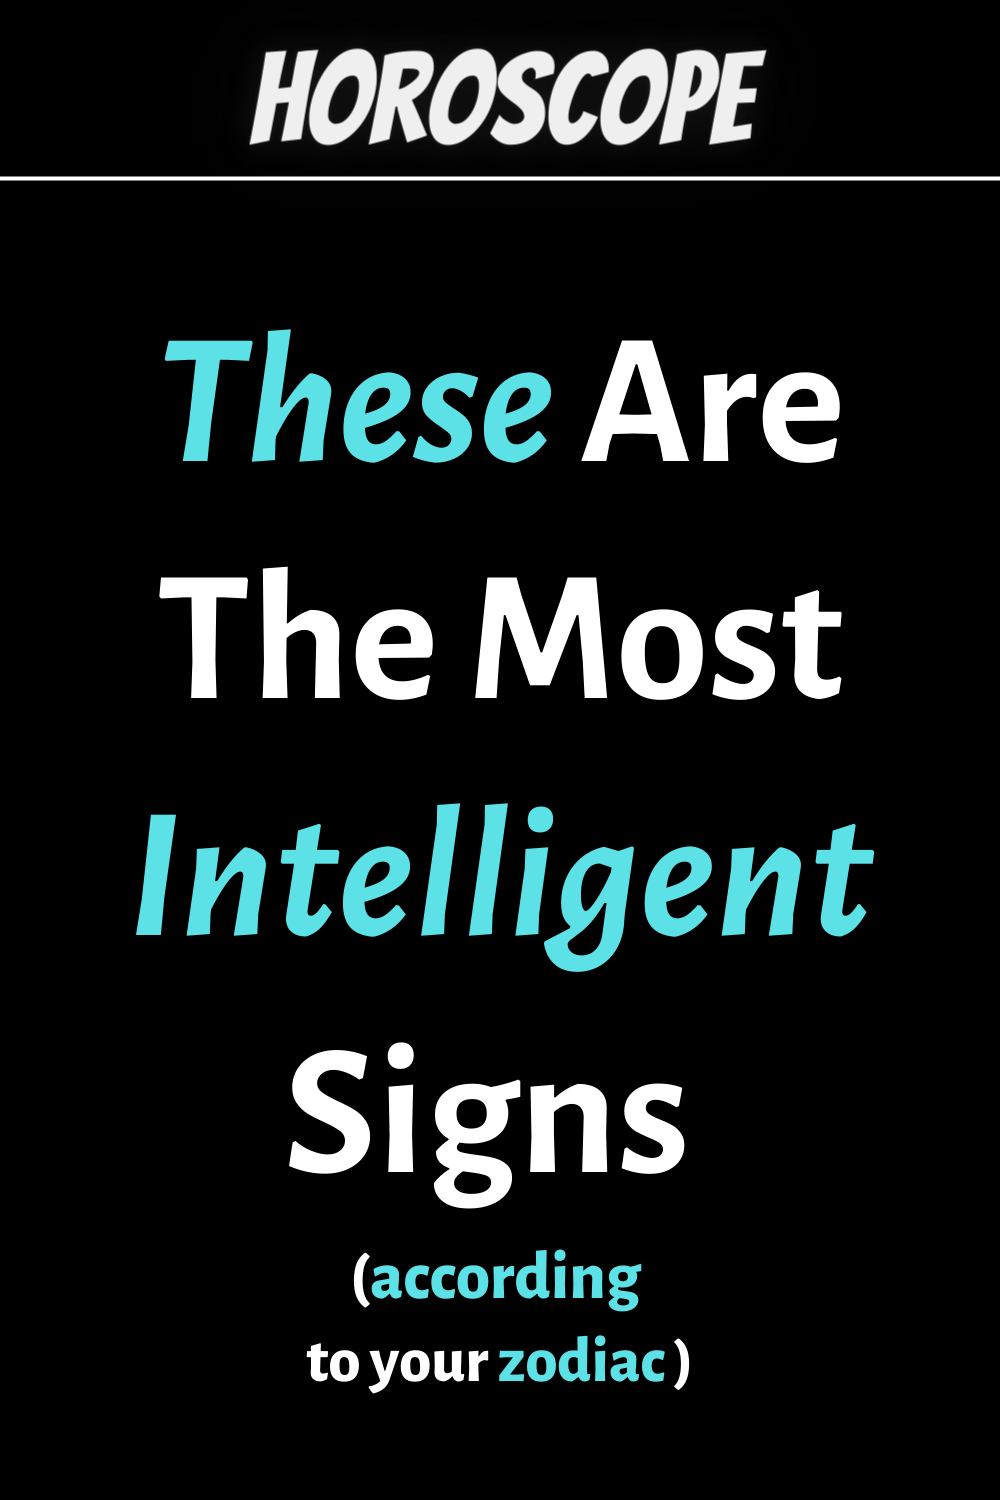 These Are The Most Intelligent Signs